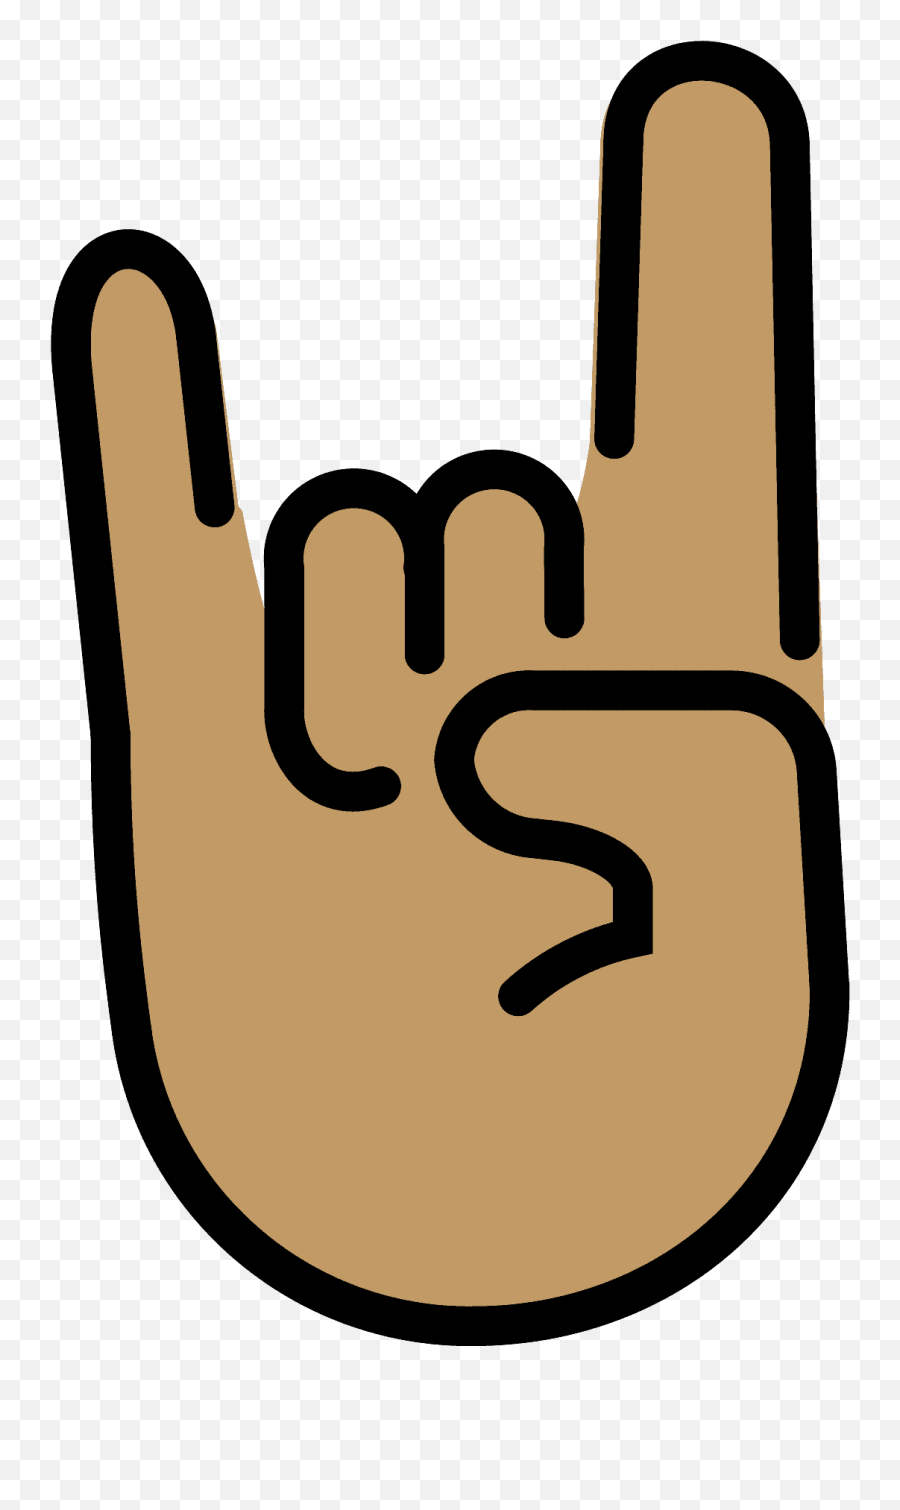 Sign Of The Horns Emoji Clipart - Sign Of The Horns,Horns Down Emoji